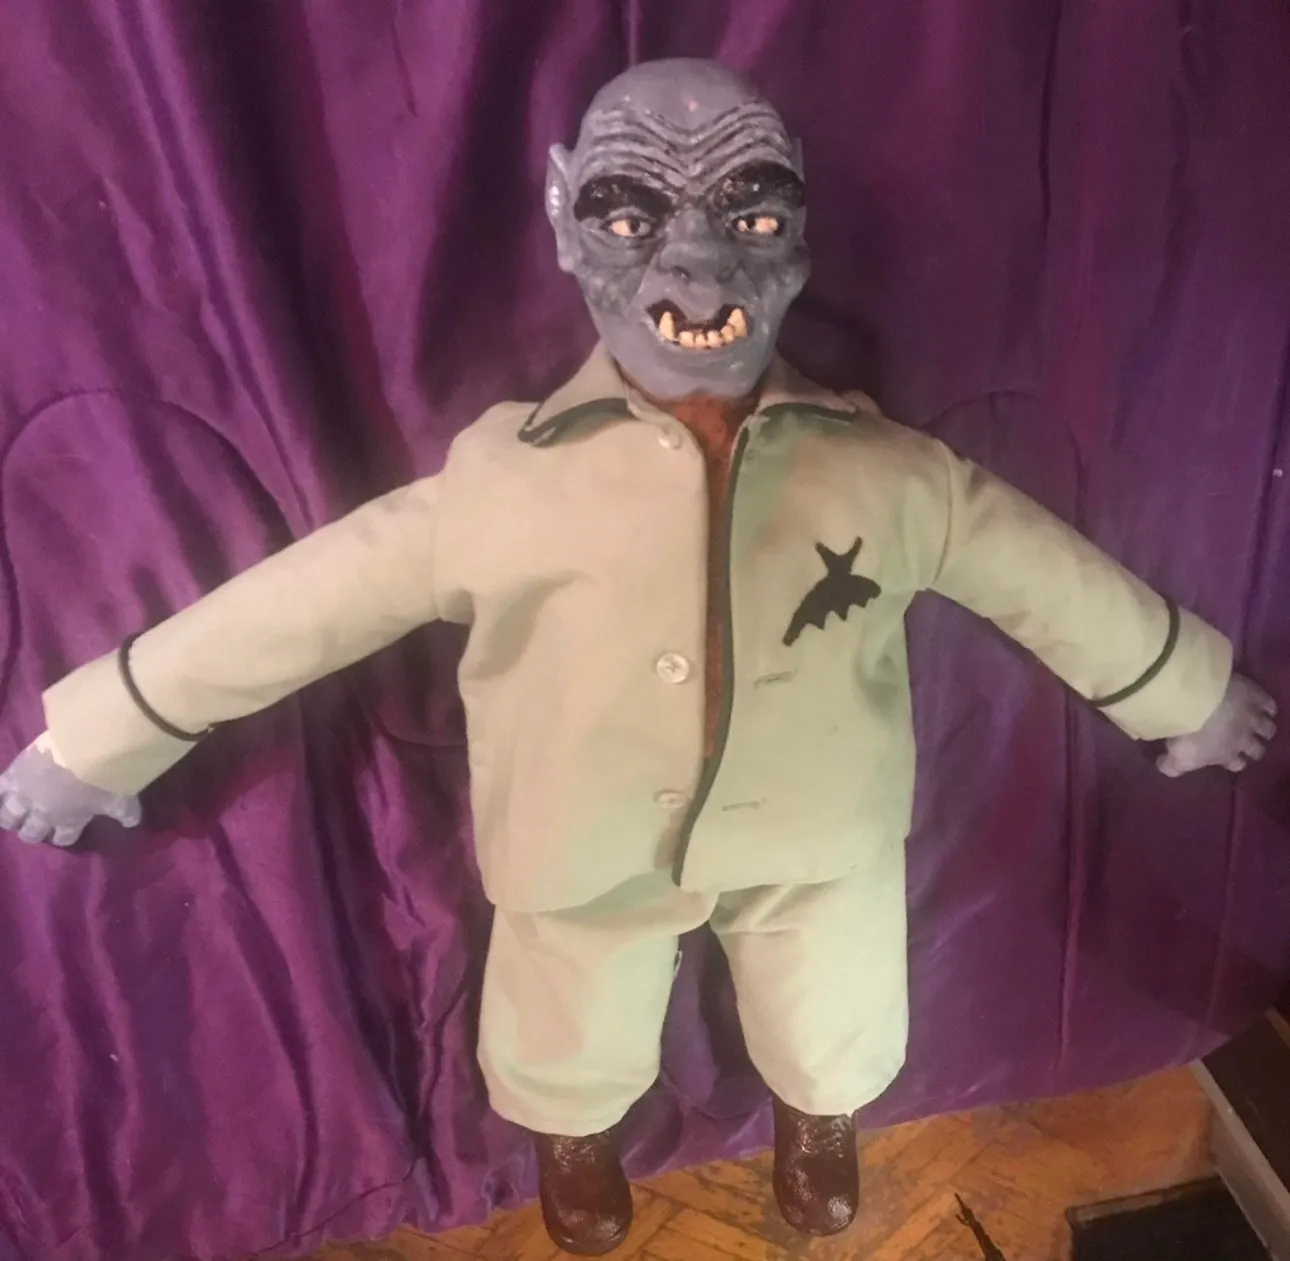 A doll with a face and arms in the shape of a man.